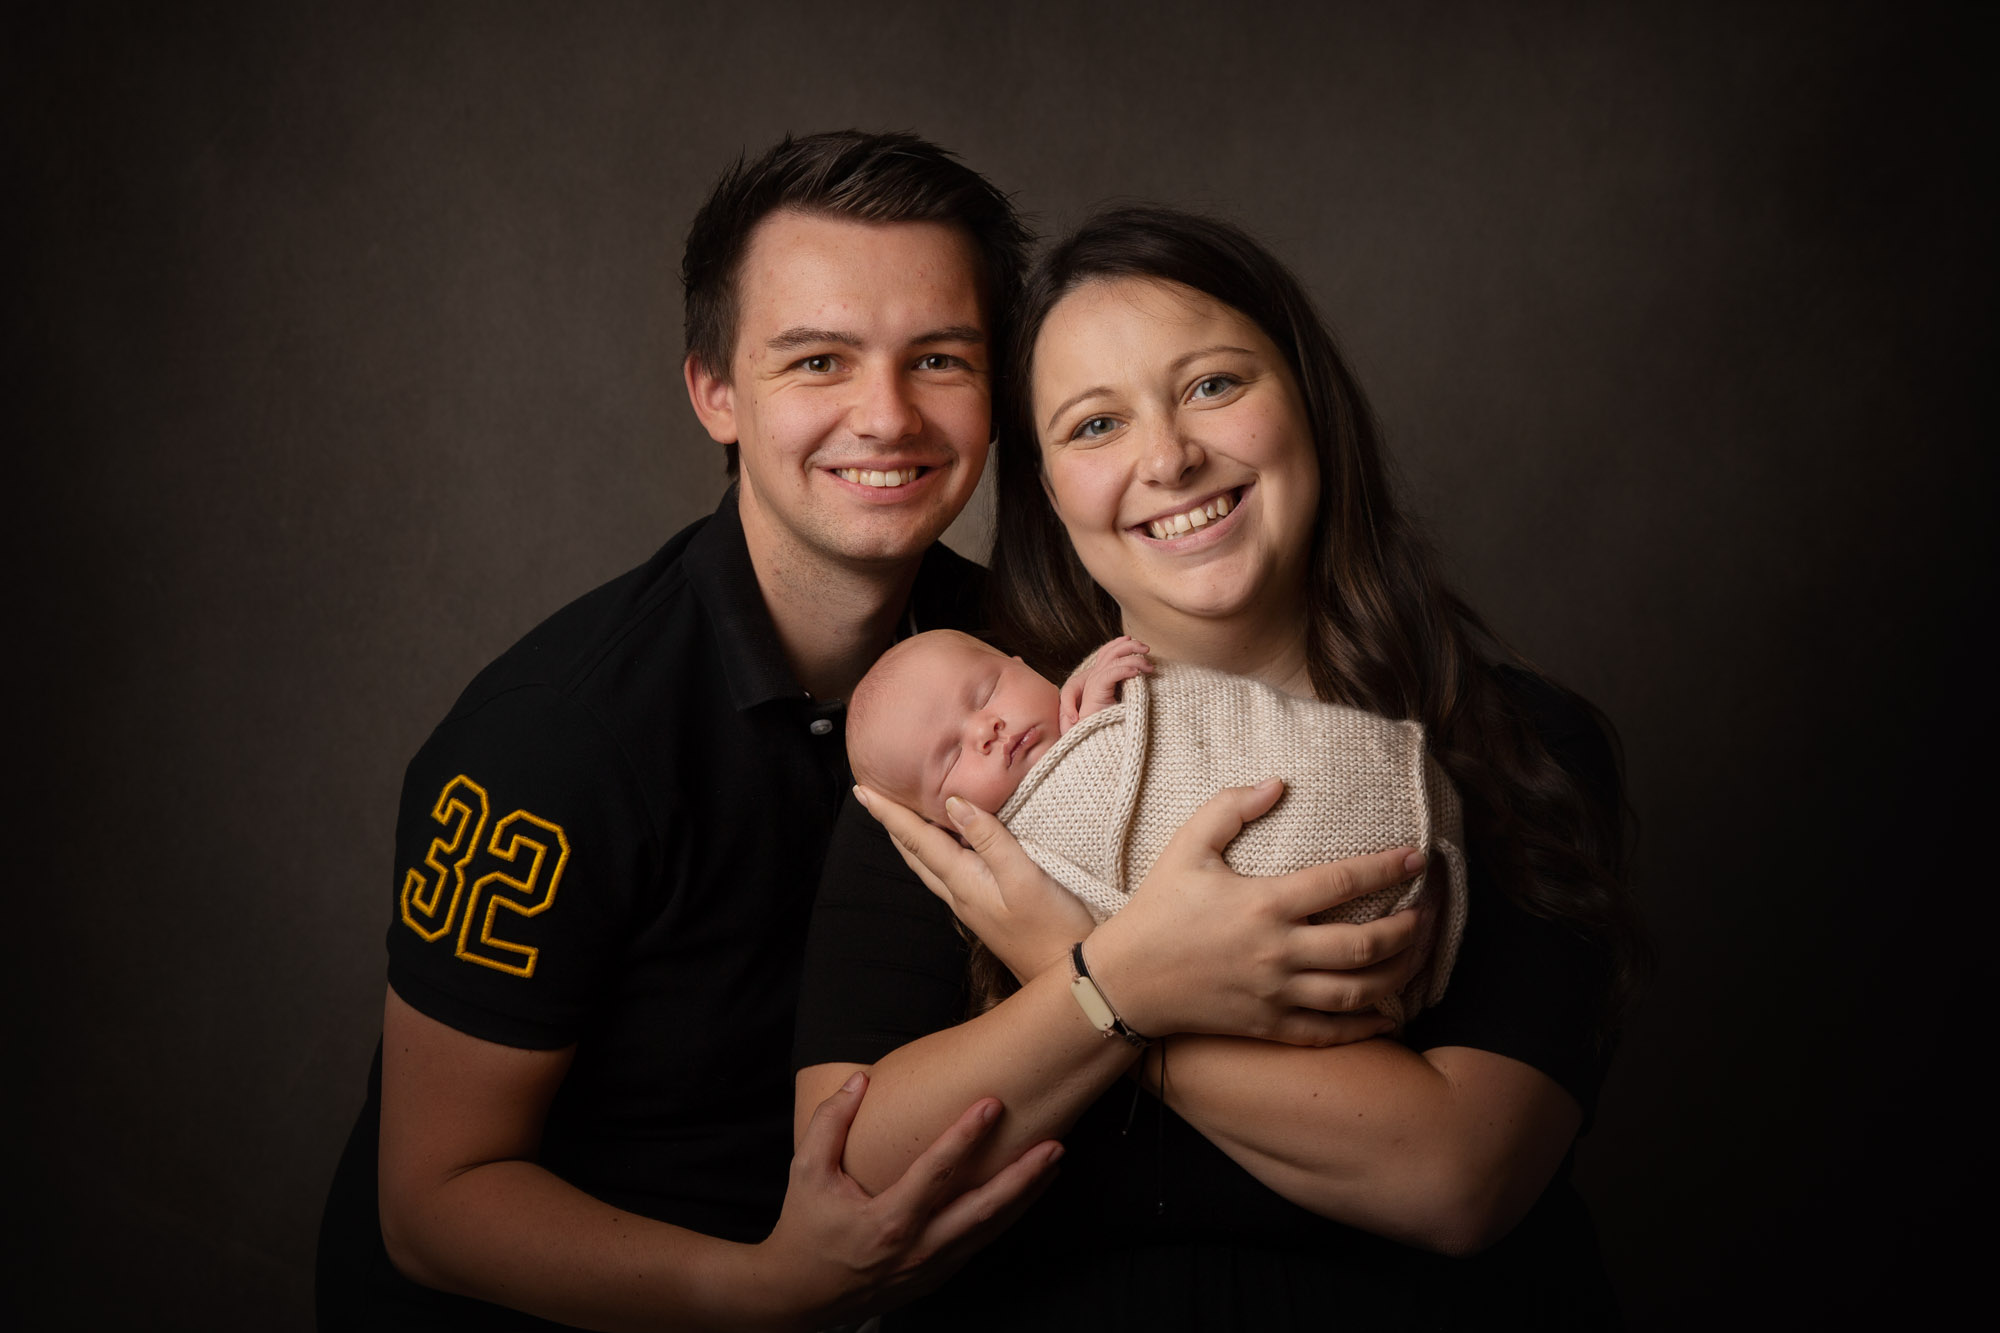 family and newborn photography